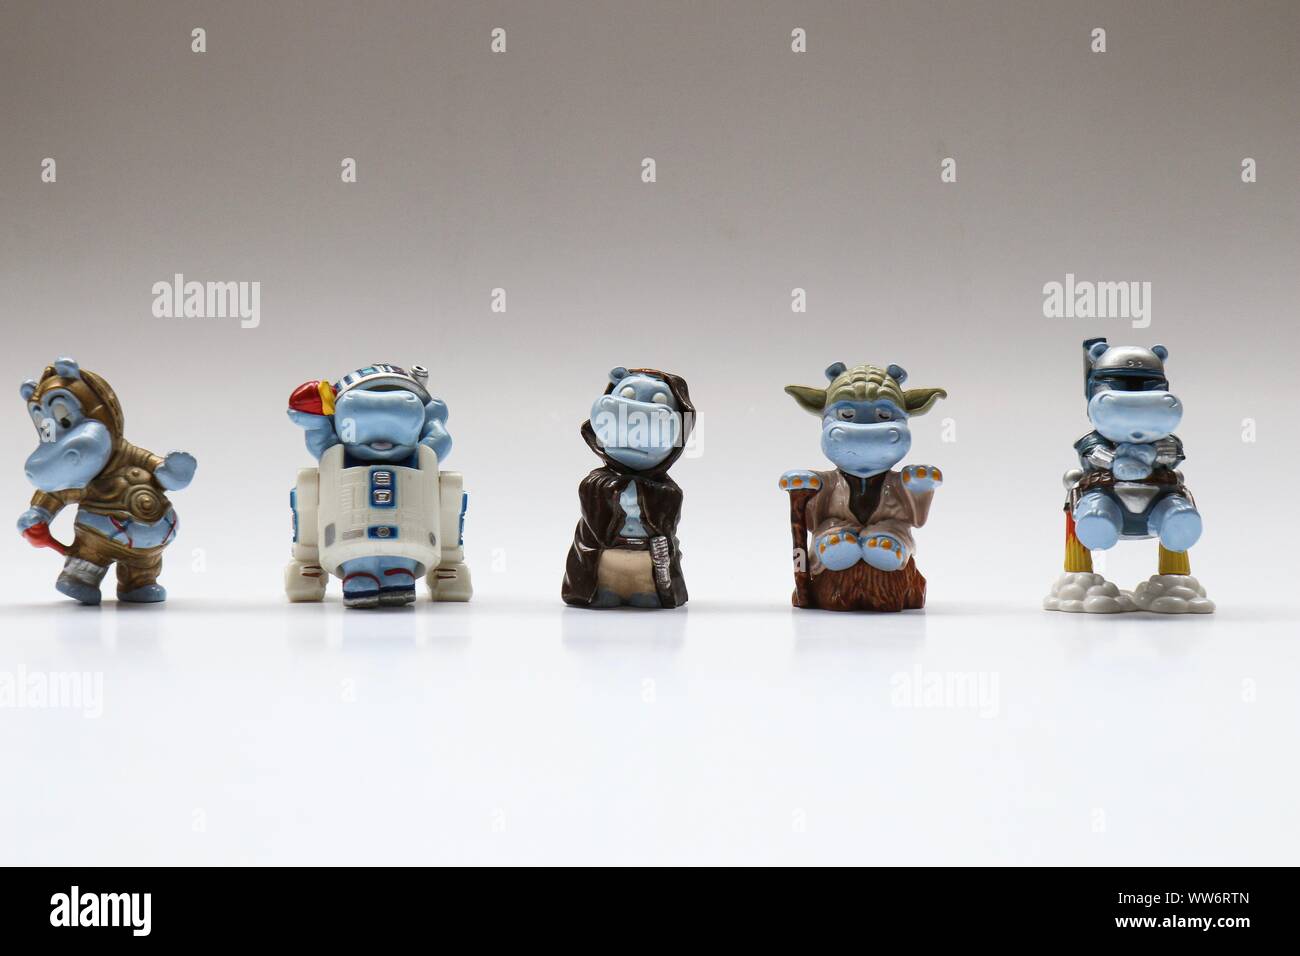 BERLIN - AUGUST 27, 2019: Vintage Star Wars Toy Figures from the Kinder Surprise Happy Hippo collection. It was released in Germany in 2002, the same Stock Photo